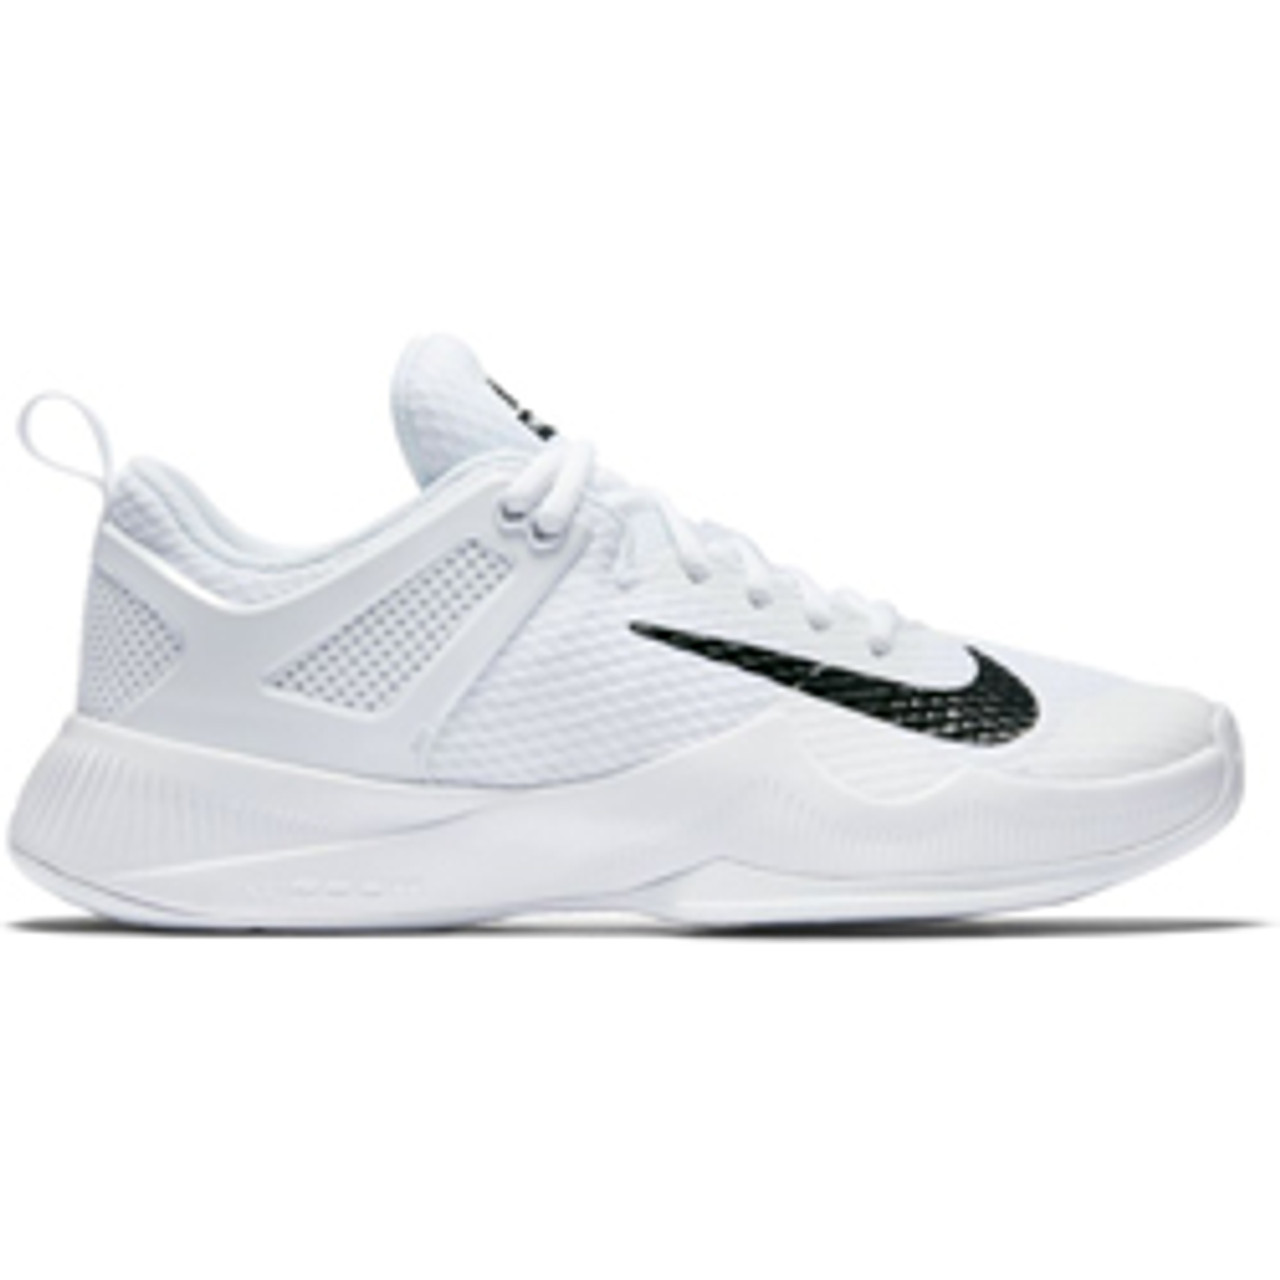 Nike Women's Air Zoom Hyperace Volleyball Shoe White